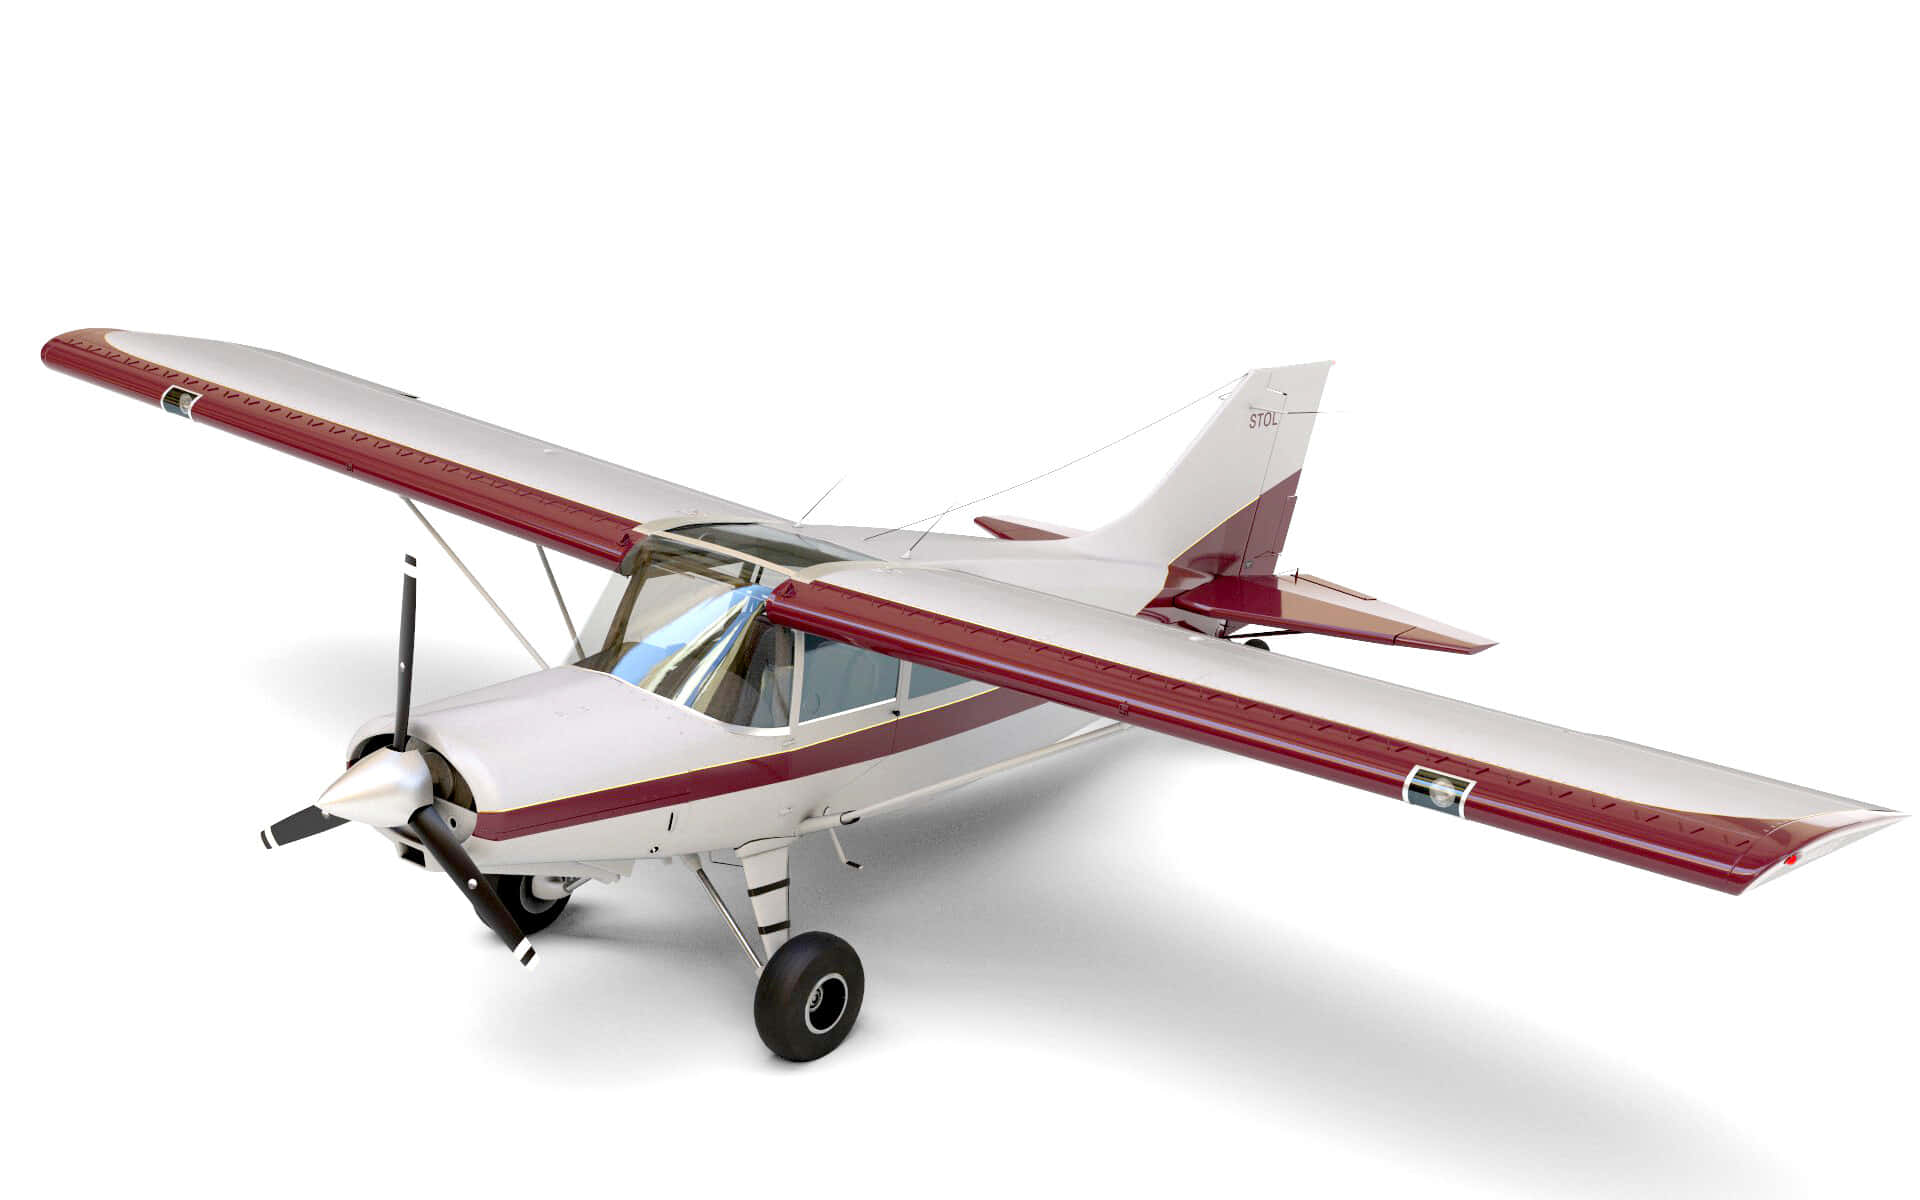 3d Scale Model Of Maule M-7-235 Small Airplane Picture